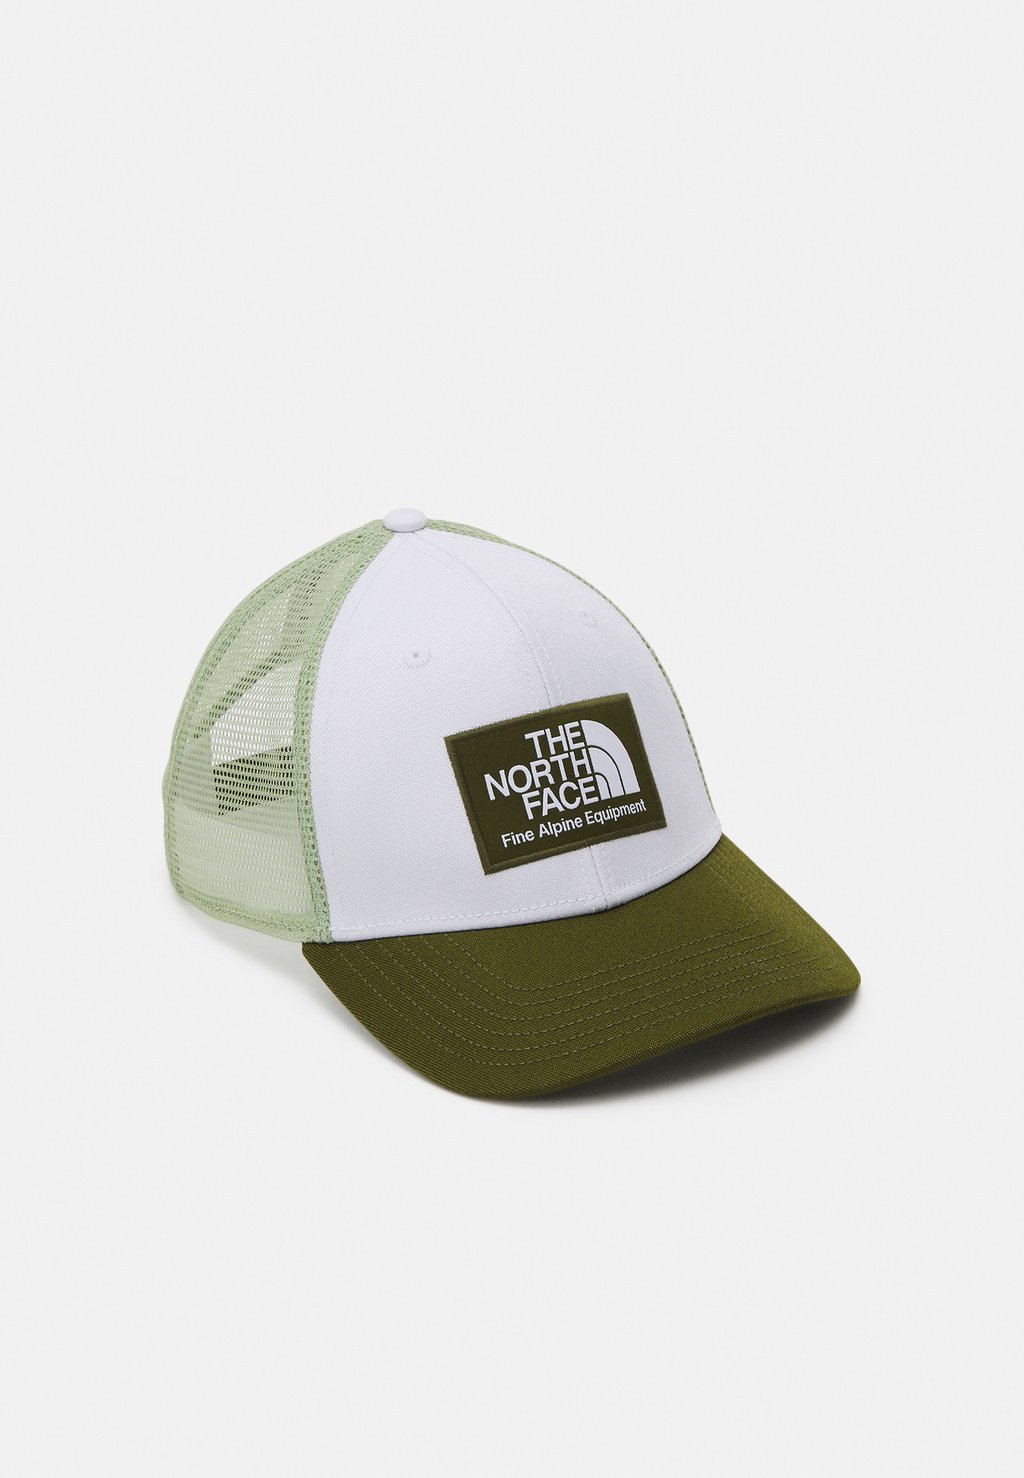 Кепка Deep Fit Mudder Trucker Unisex The North Face, цвет forest olive/misty sage